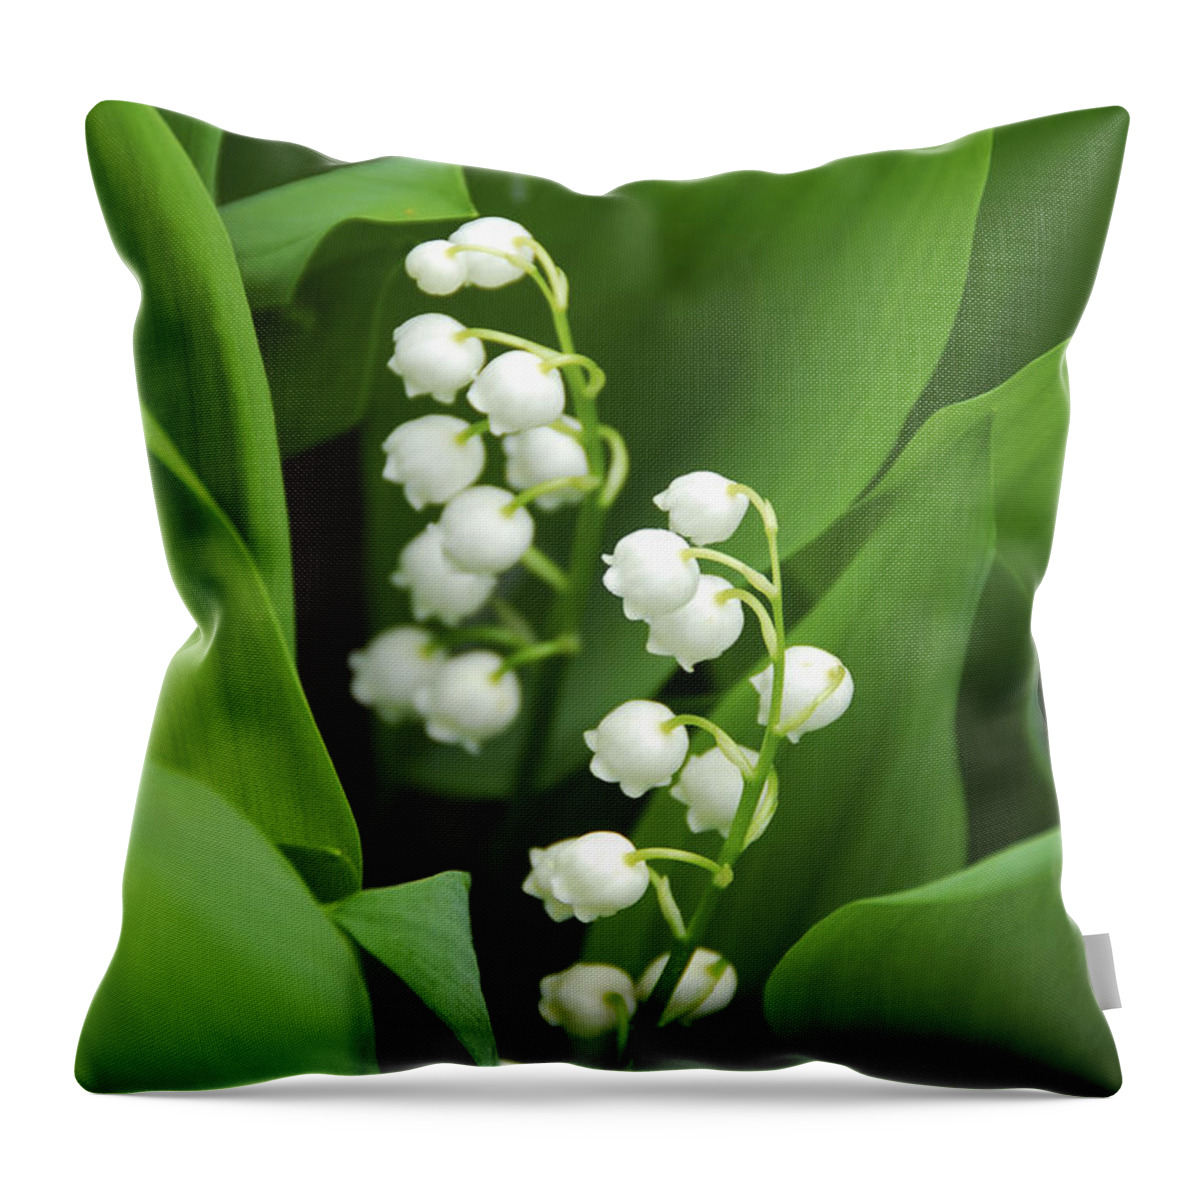 Lily Throw Pillow featuring the photograph Lily-of-the-valley by Elena Elisseeva